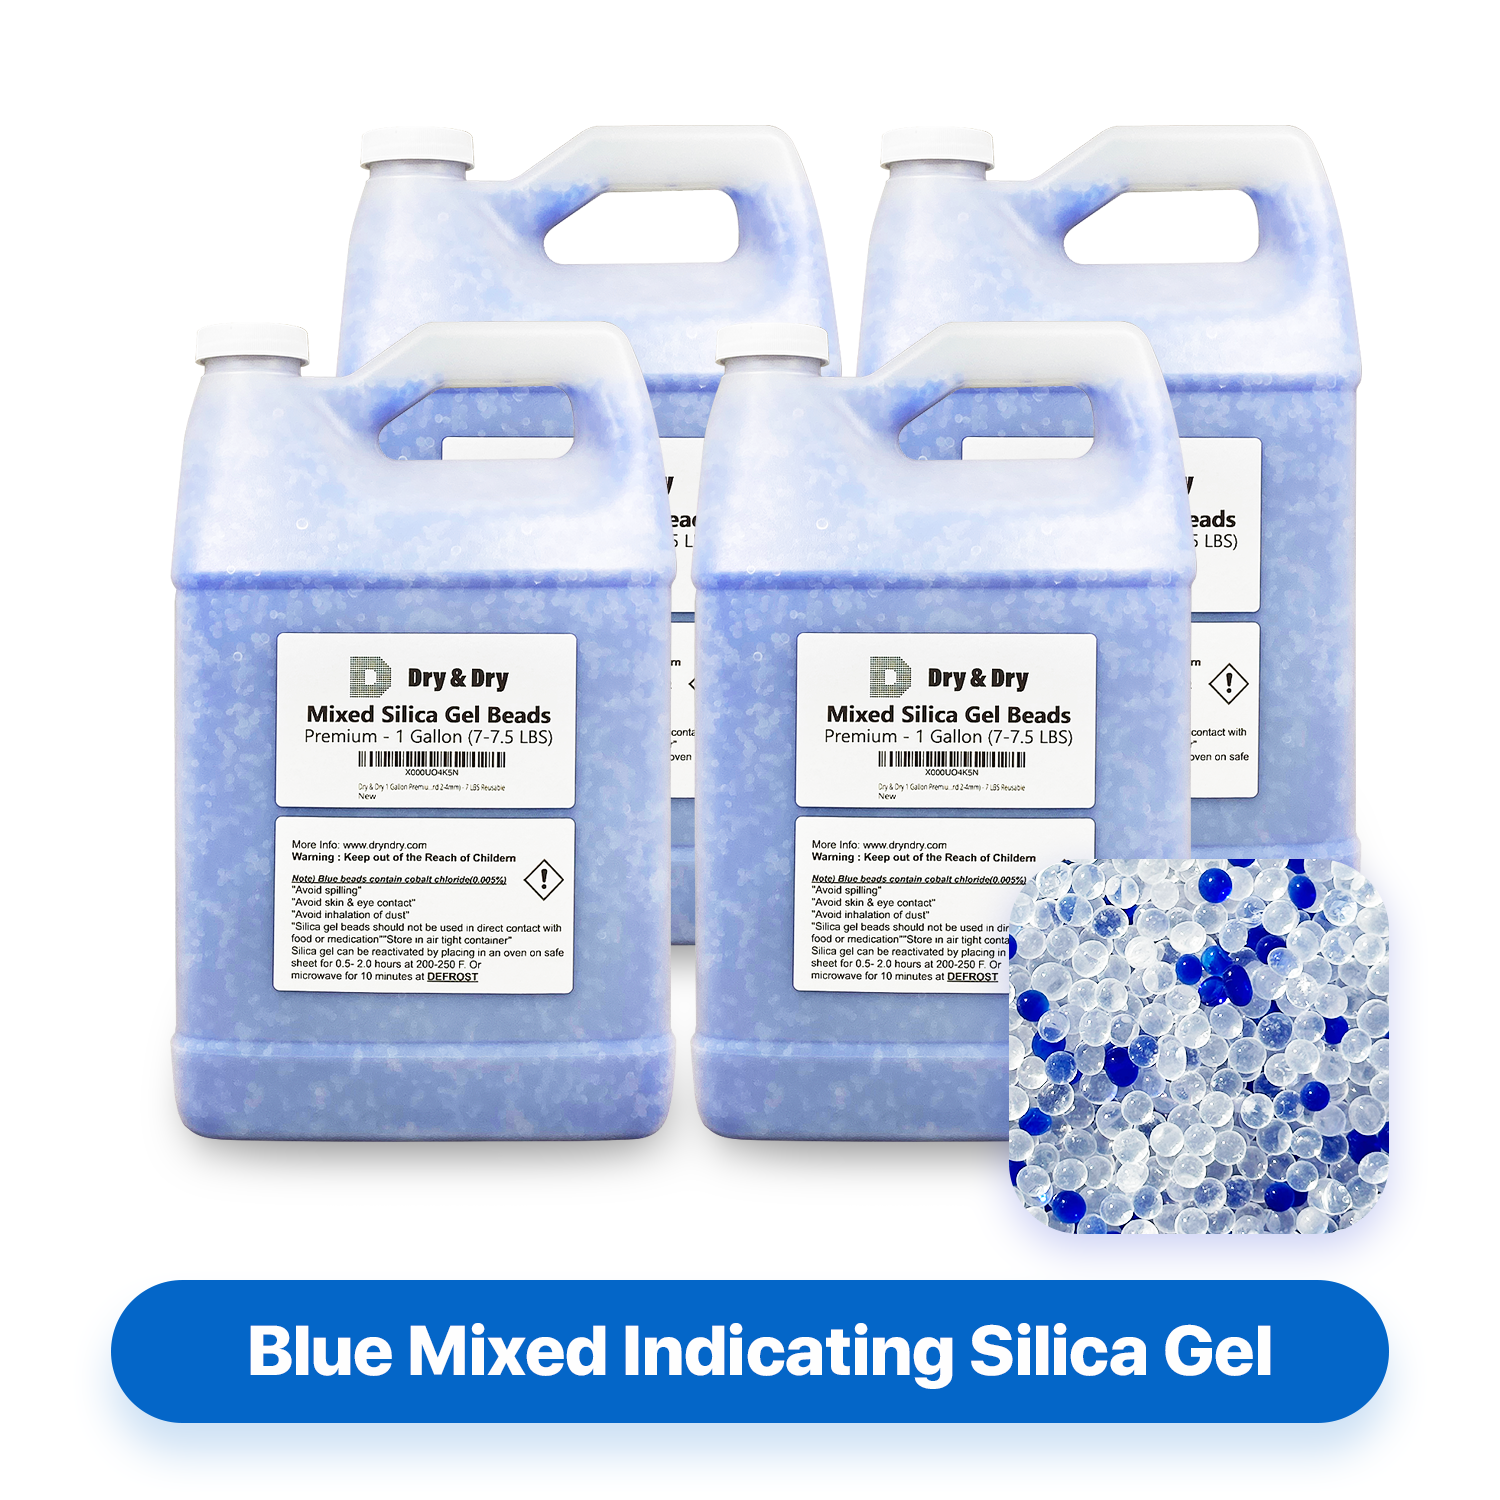 Dry & Dry (2 Gallon-NET 12 LBS) Color Indicating Premium Silica